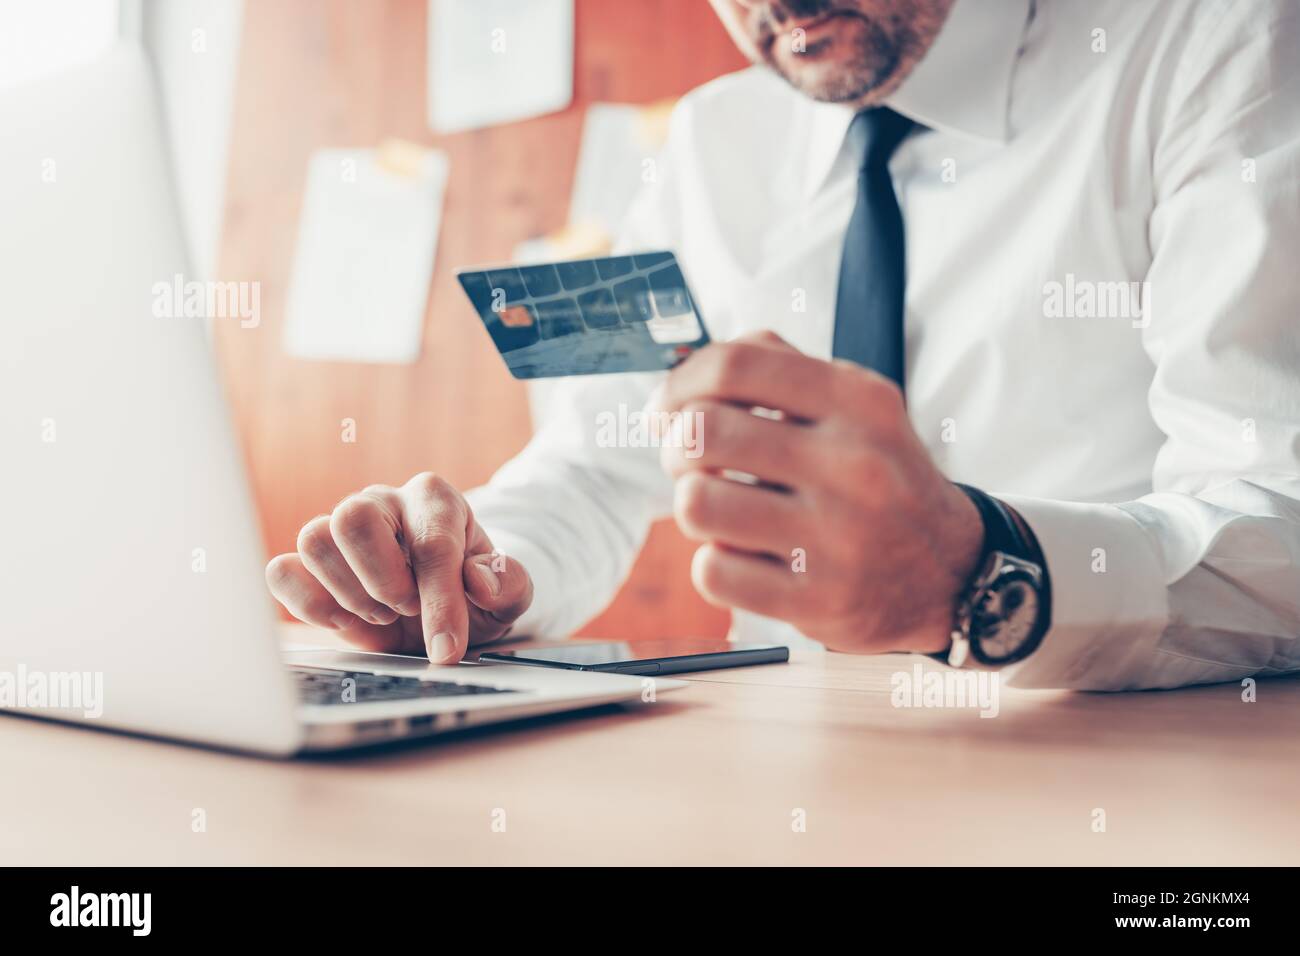 E-business, businessman using credit card and laptop computer for online financial transaction, close up with selective focus Stock Photo